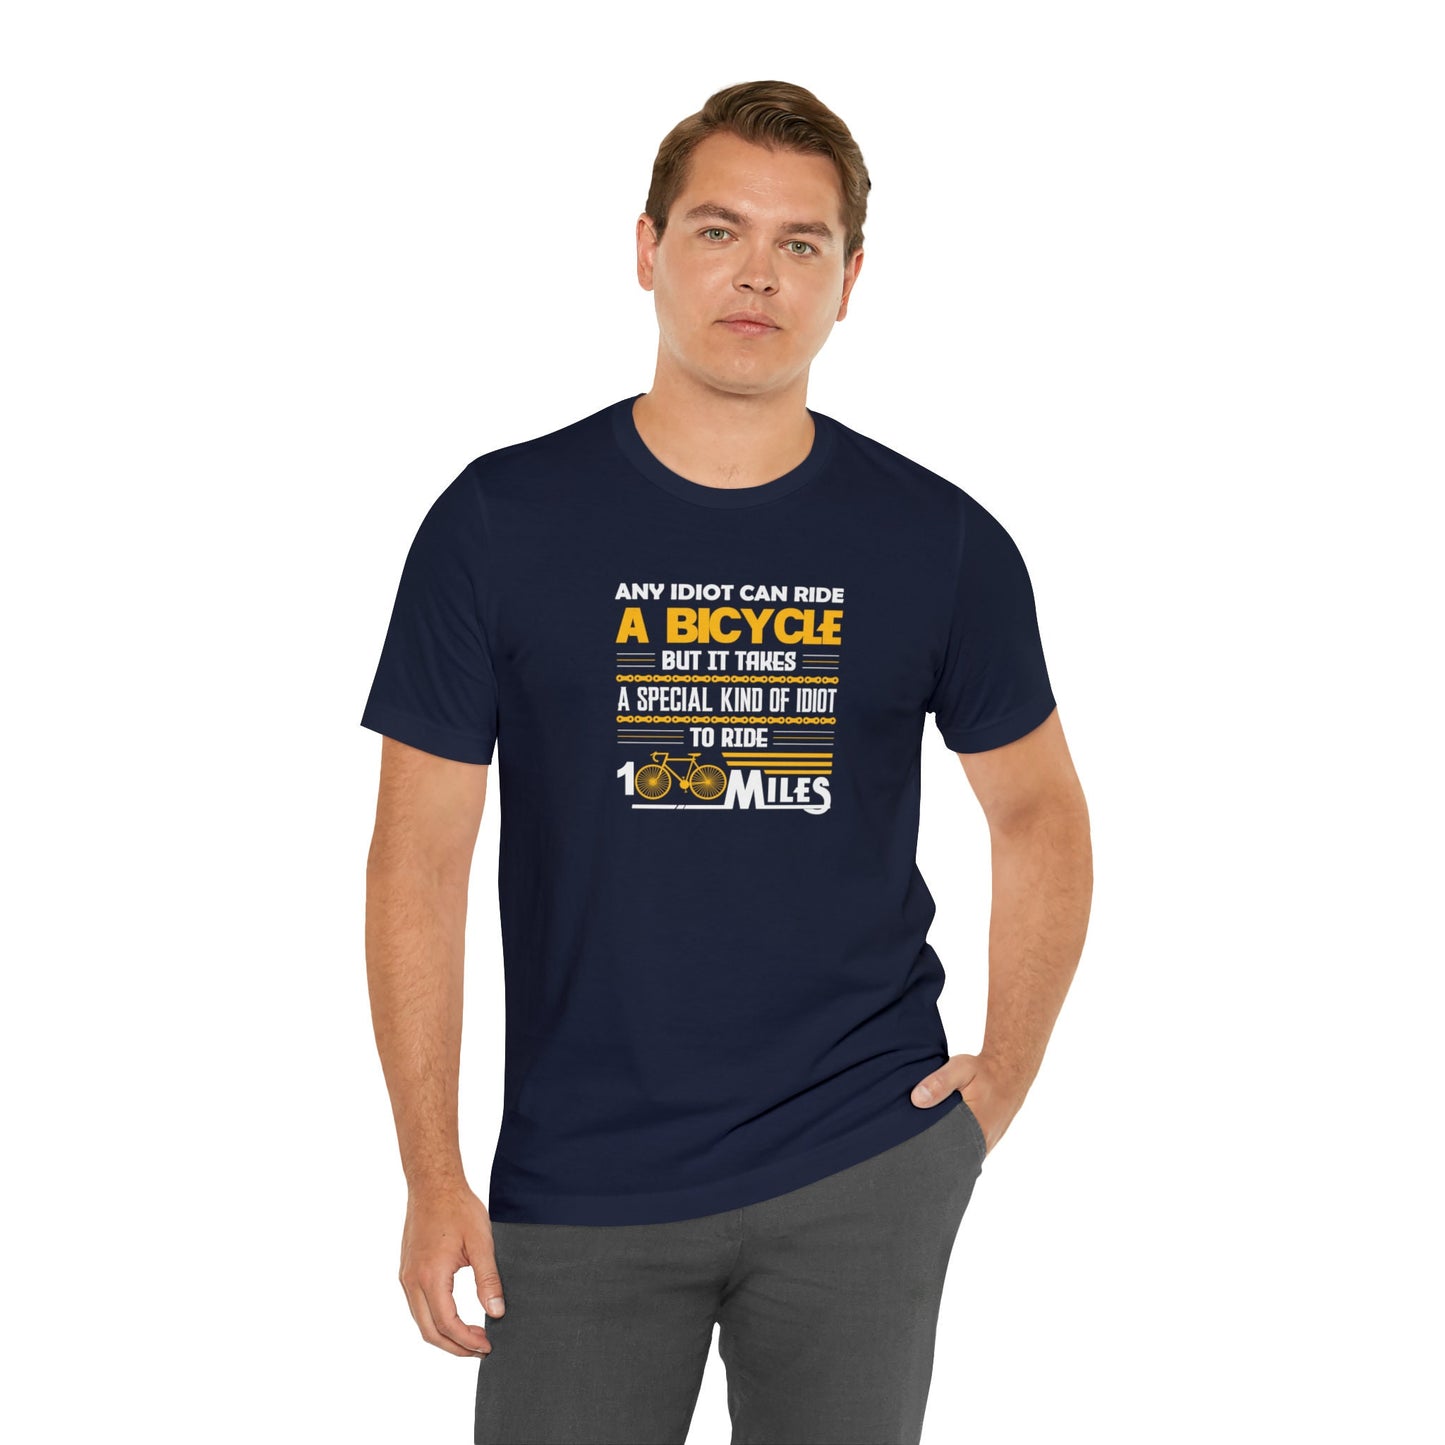 Any Idiot Can Ride A Bicycle, But It Takes A Special Kind Of Idiot To Ride 100 Miles Shirt, Short Sleeve Crewneck Unisex Tee